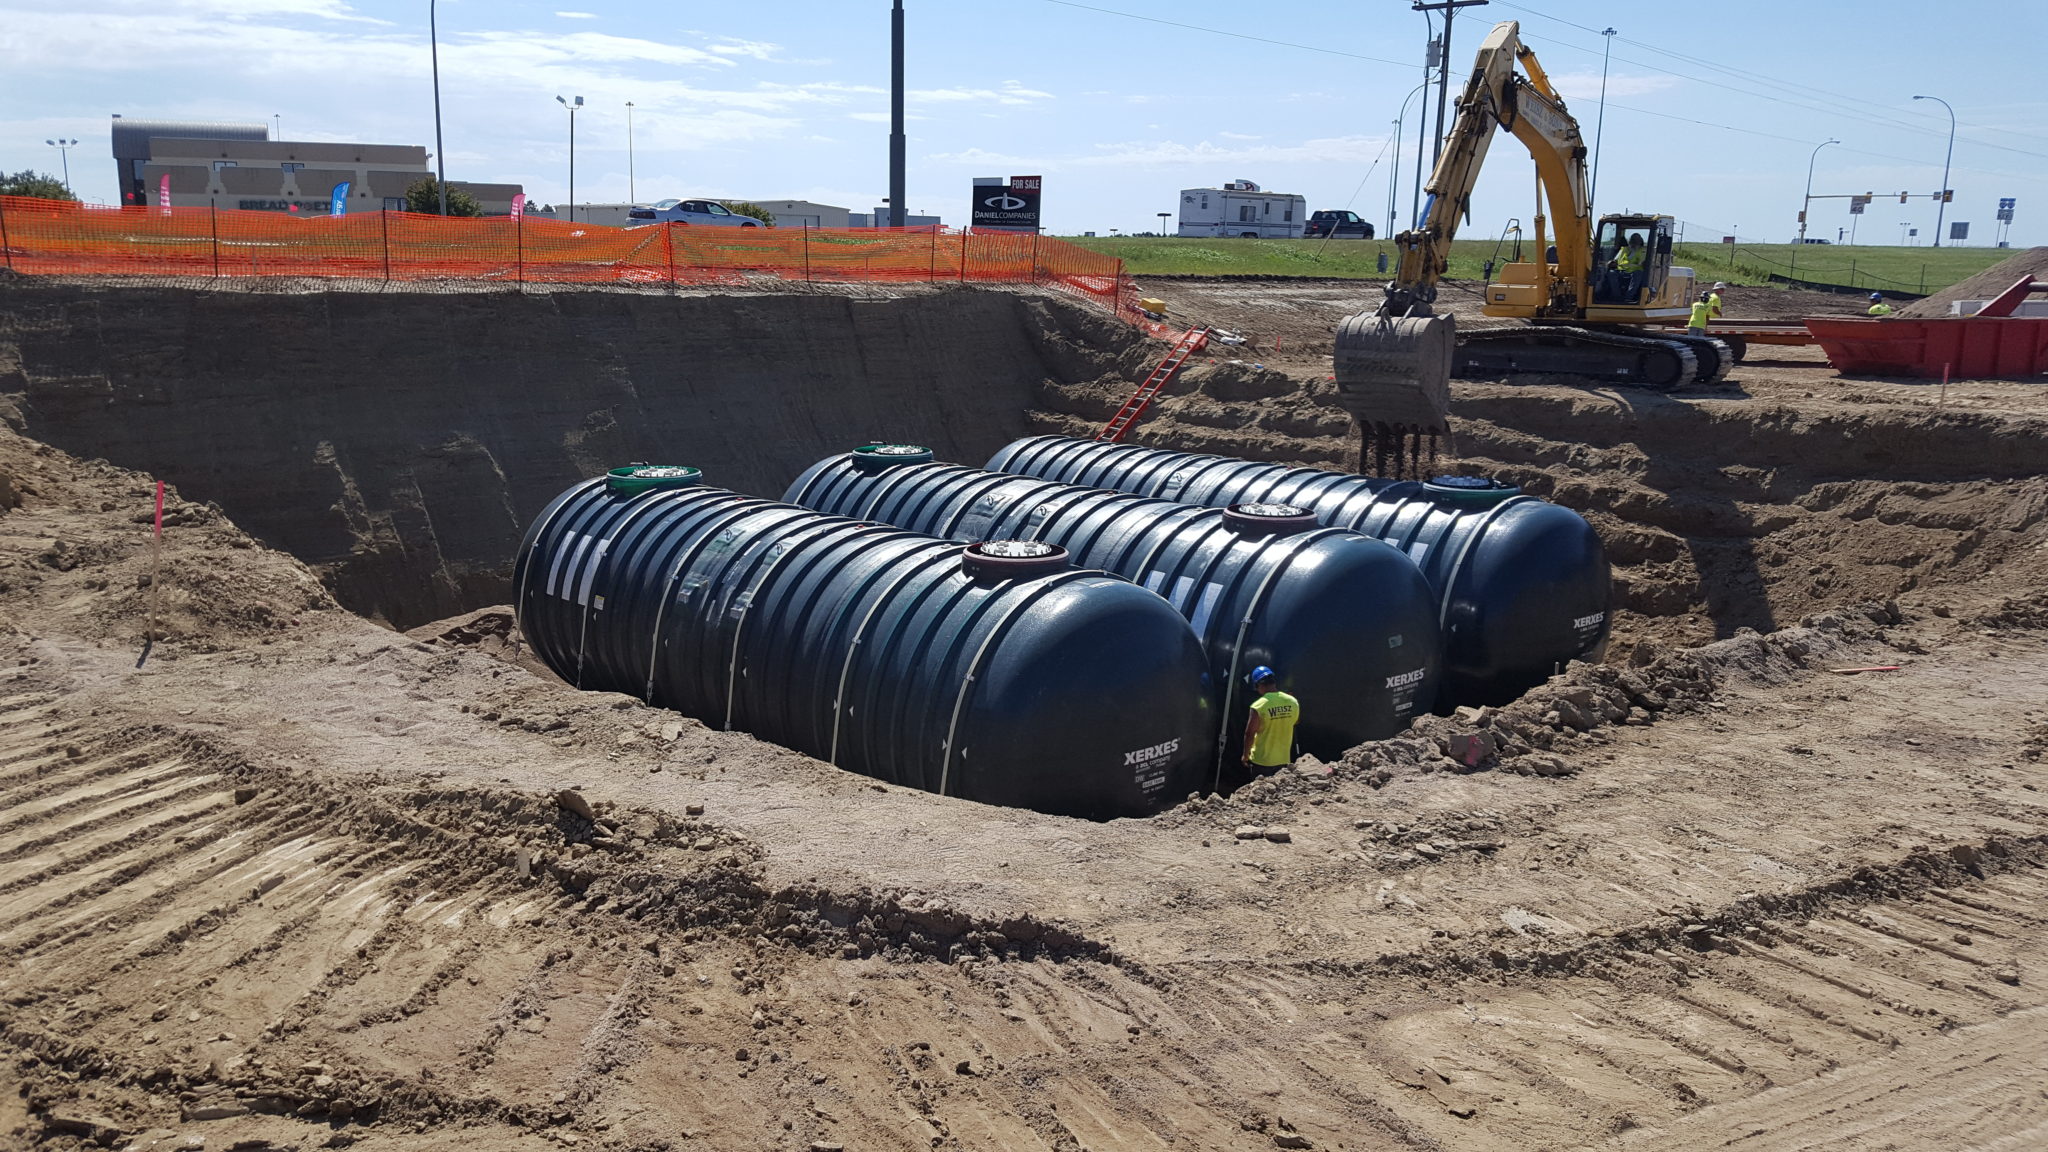 Tanks in ground with construction